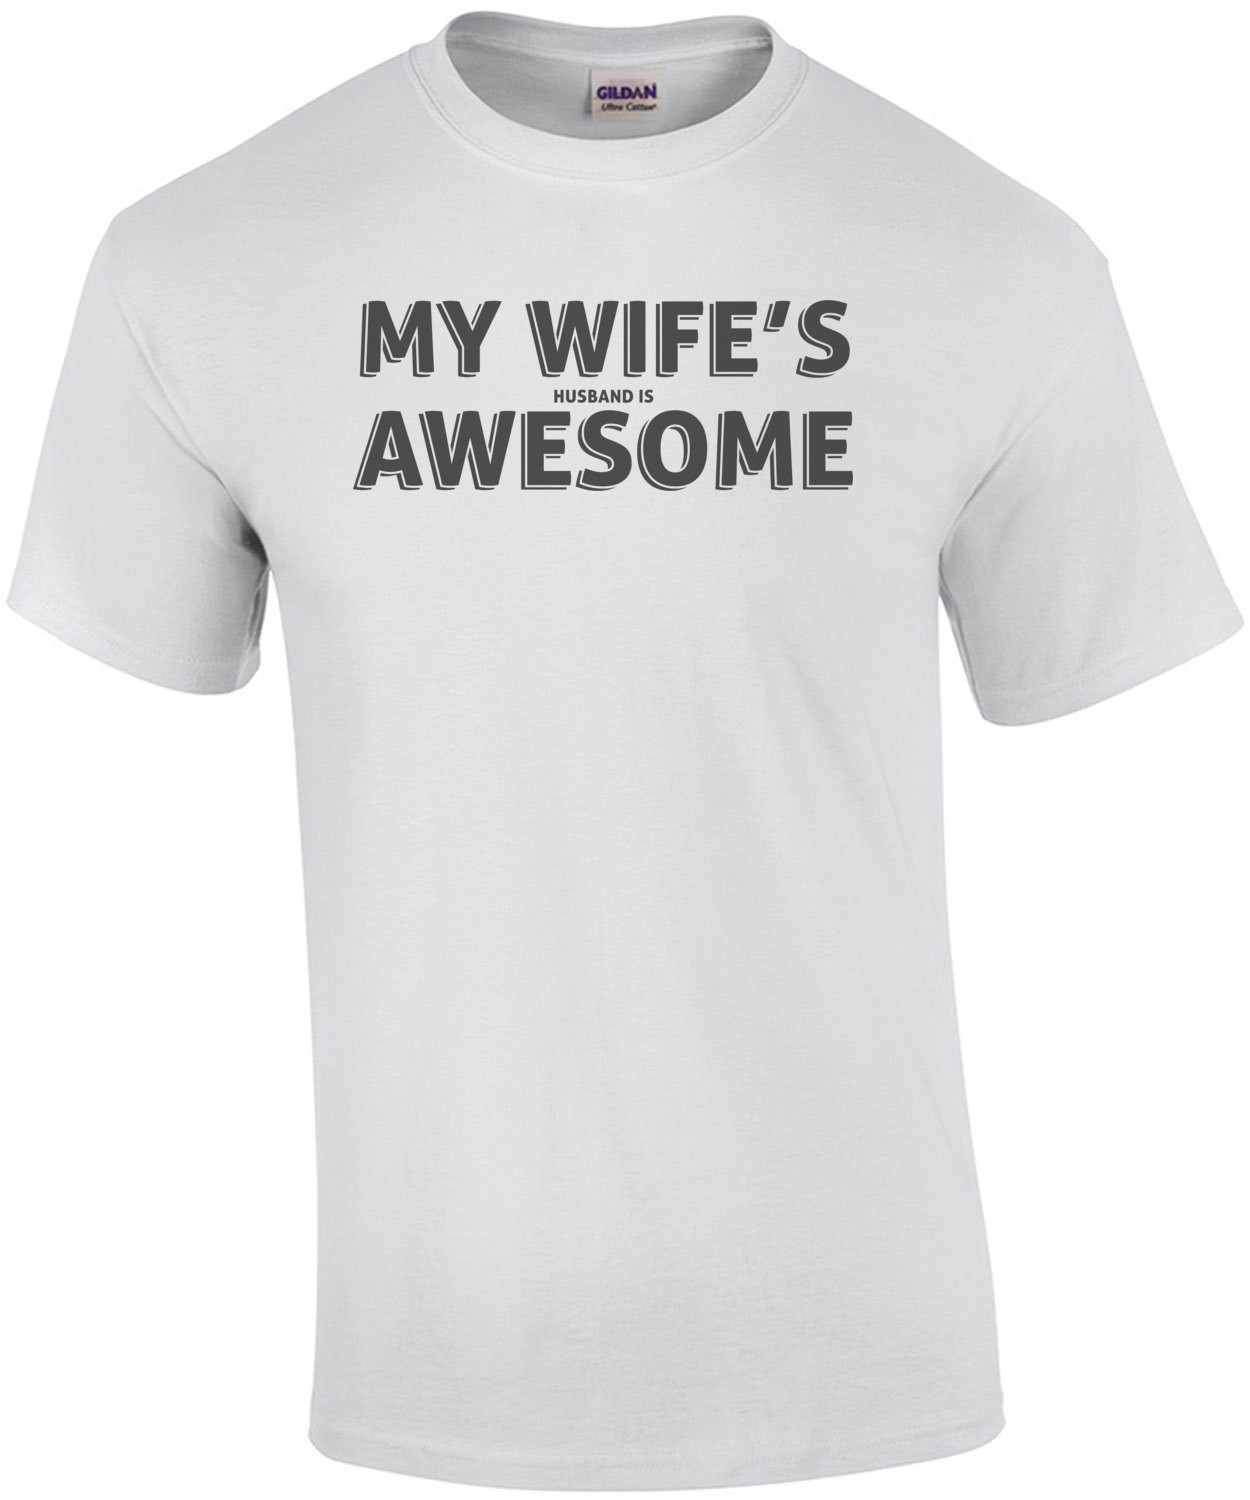 My Wife's Husband is Awesome T-Shirt